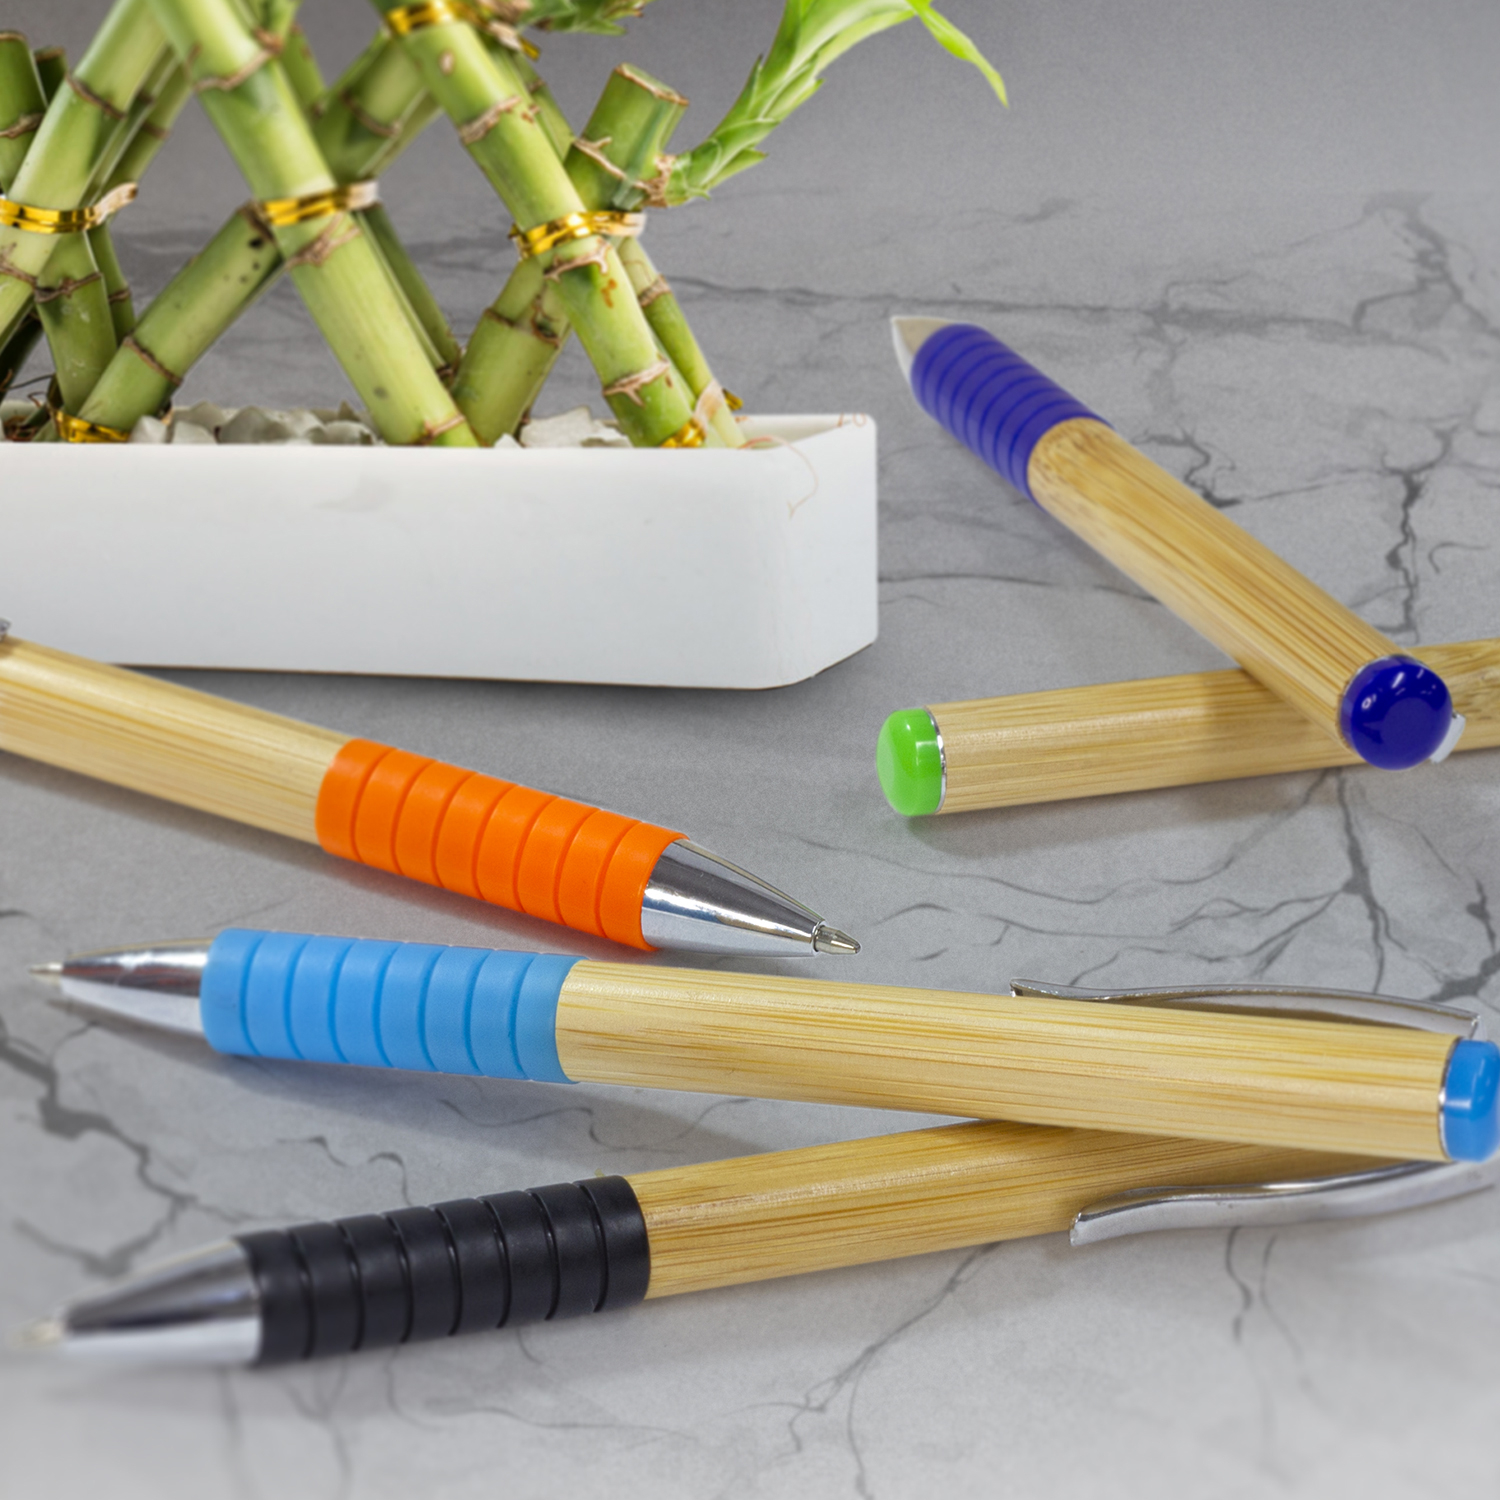 Bamboo Twist Pen Features